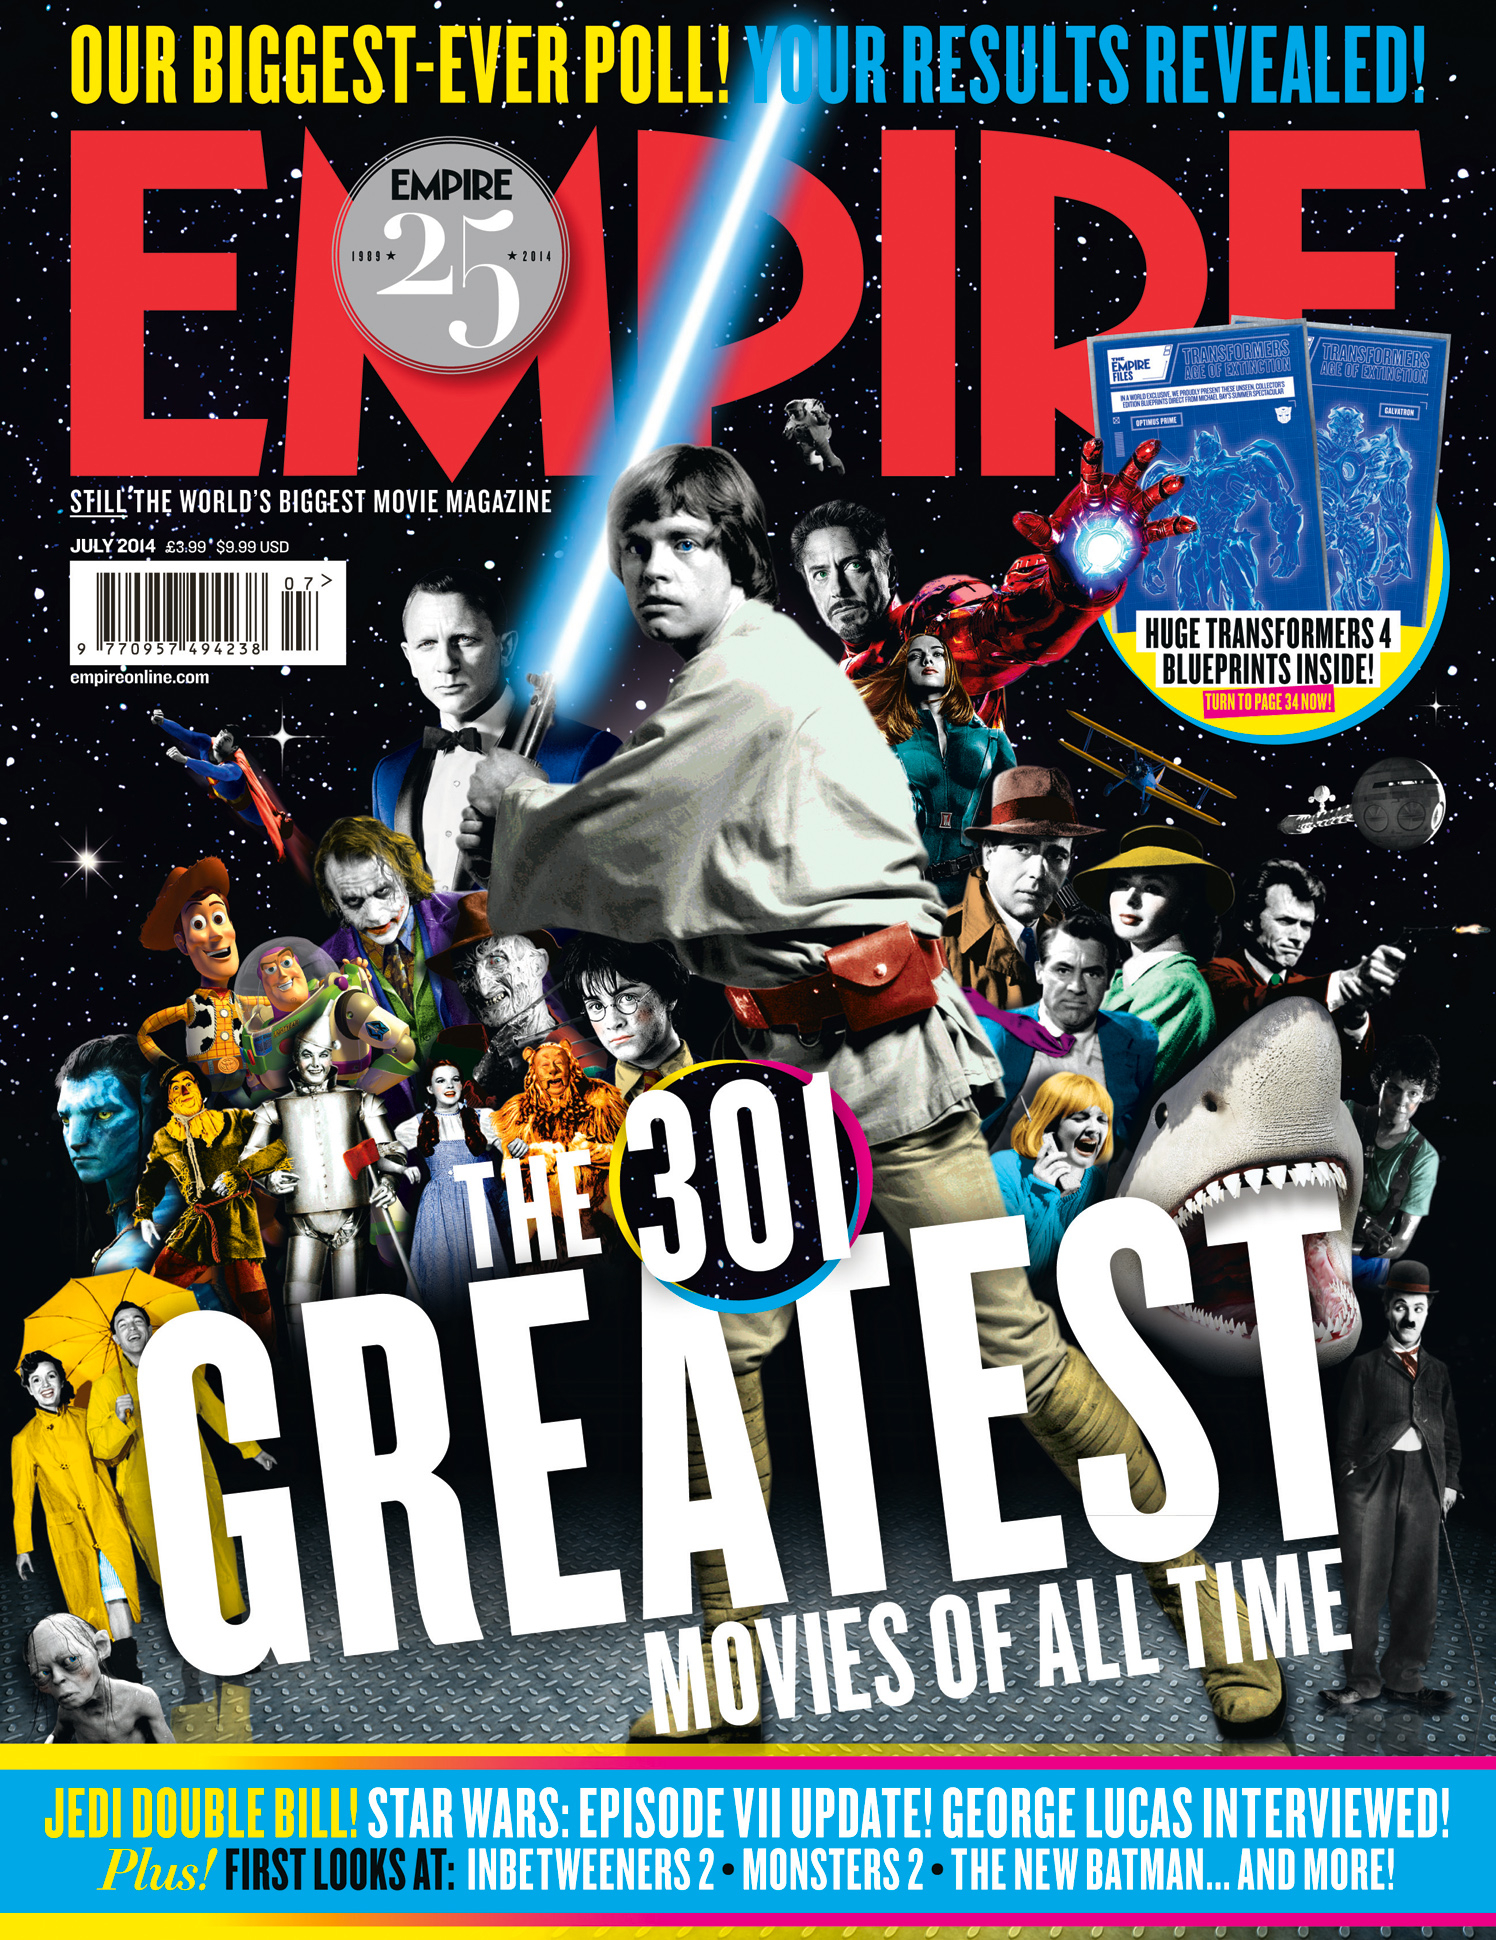 301 Greatest Movies of all time cover / Empire